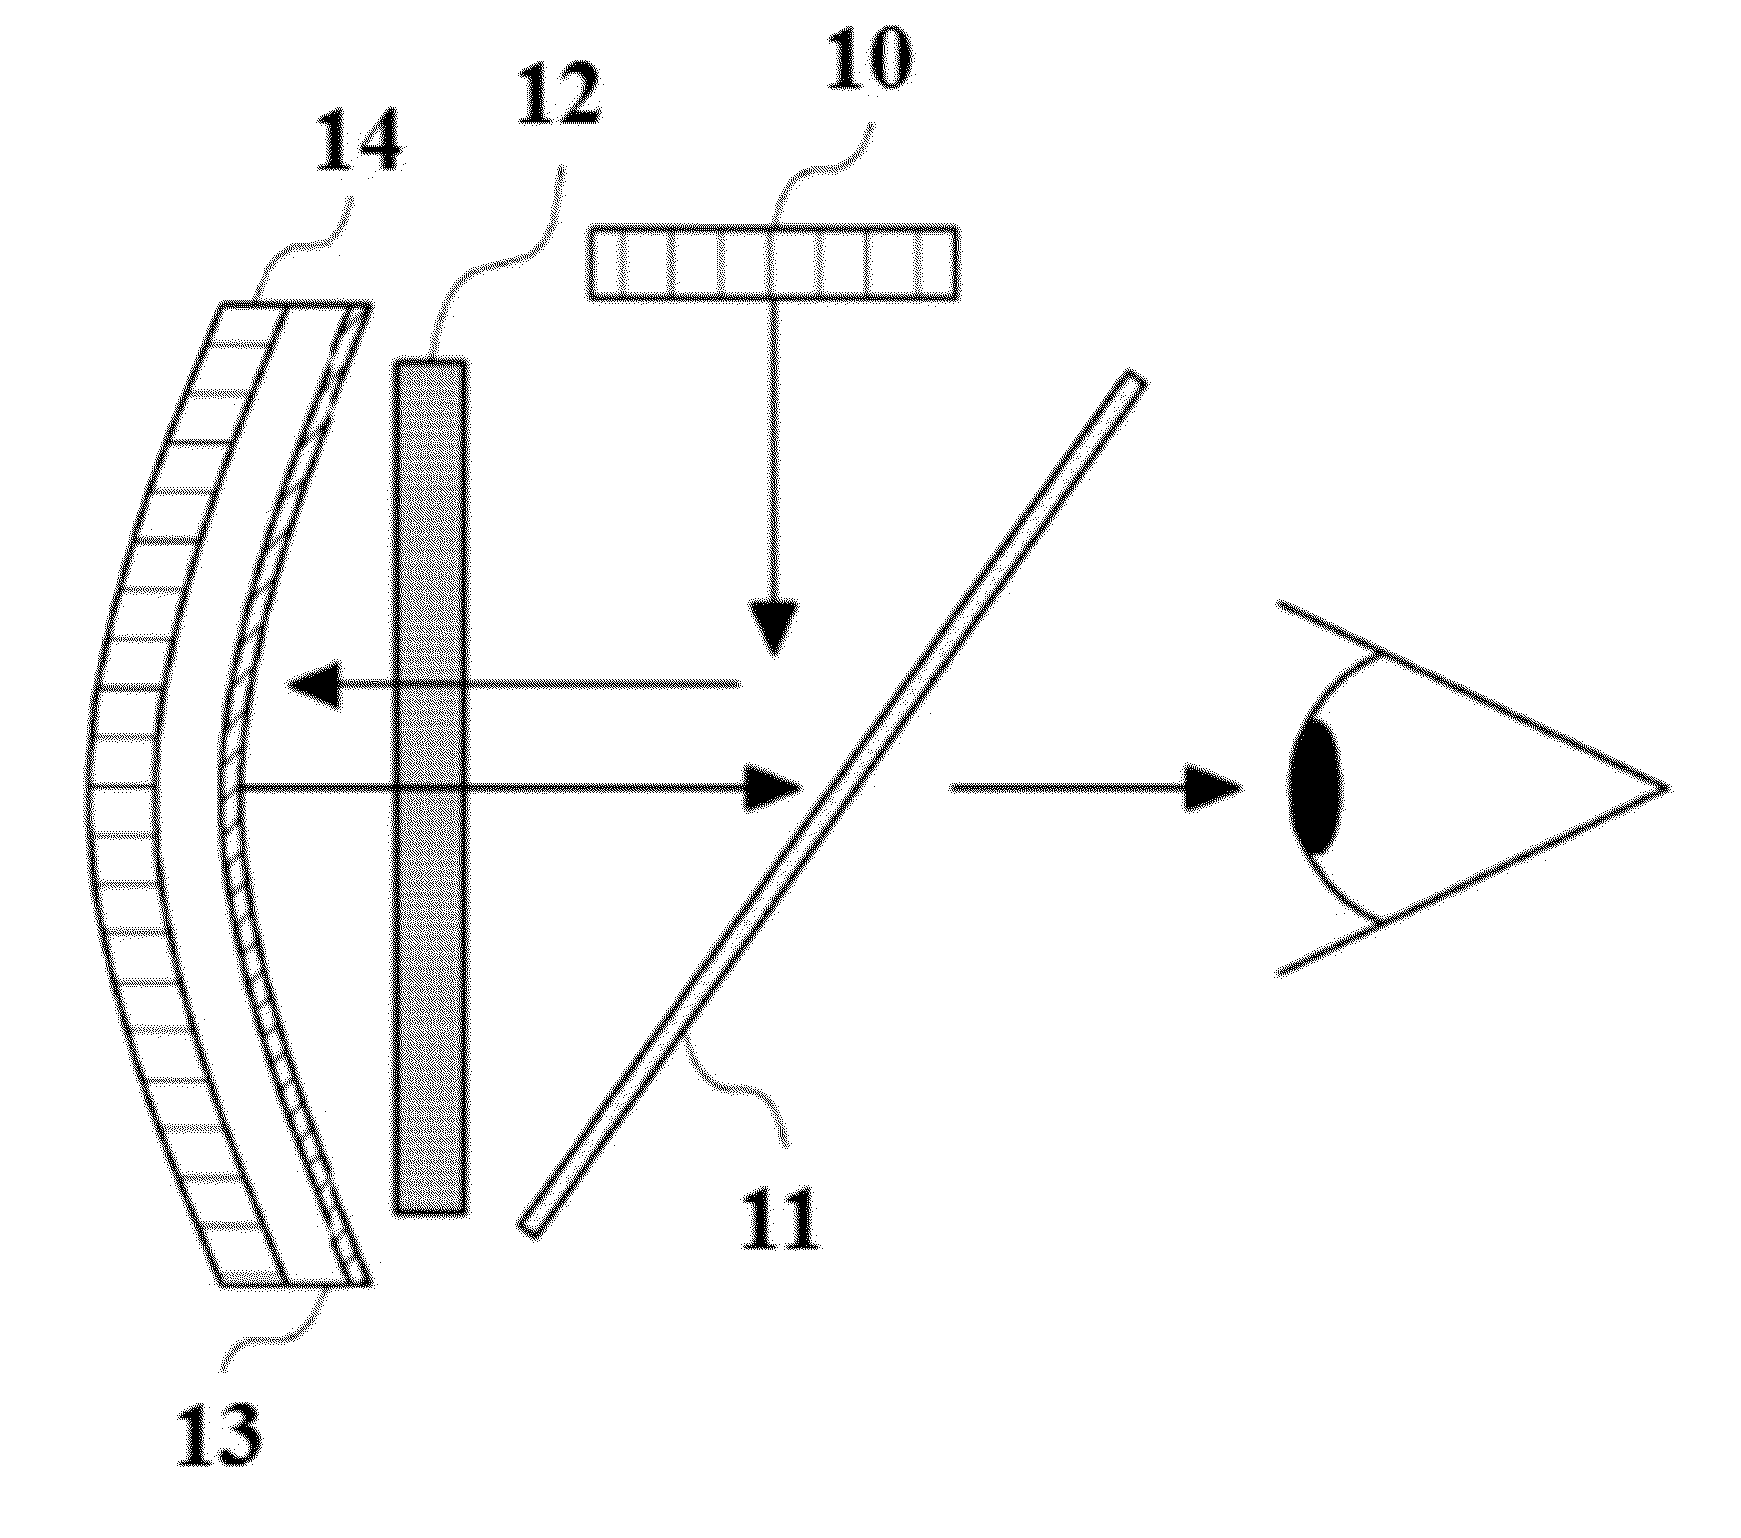 Optical system for see-through head mounted display